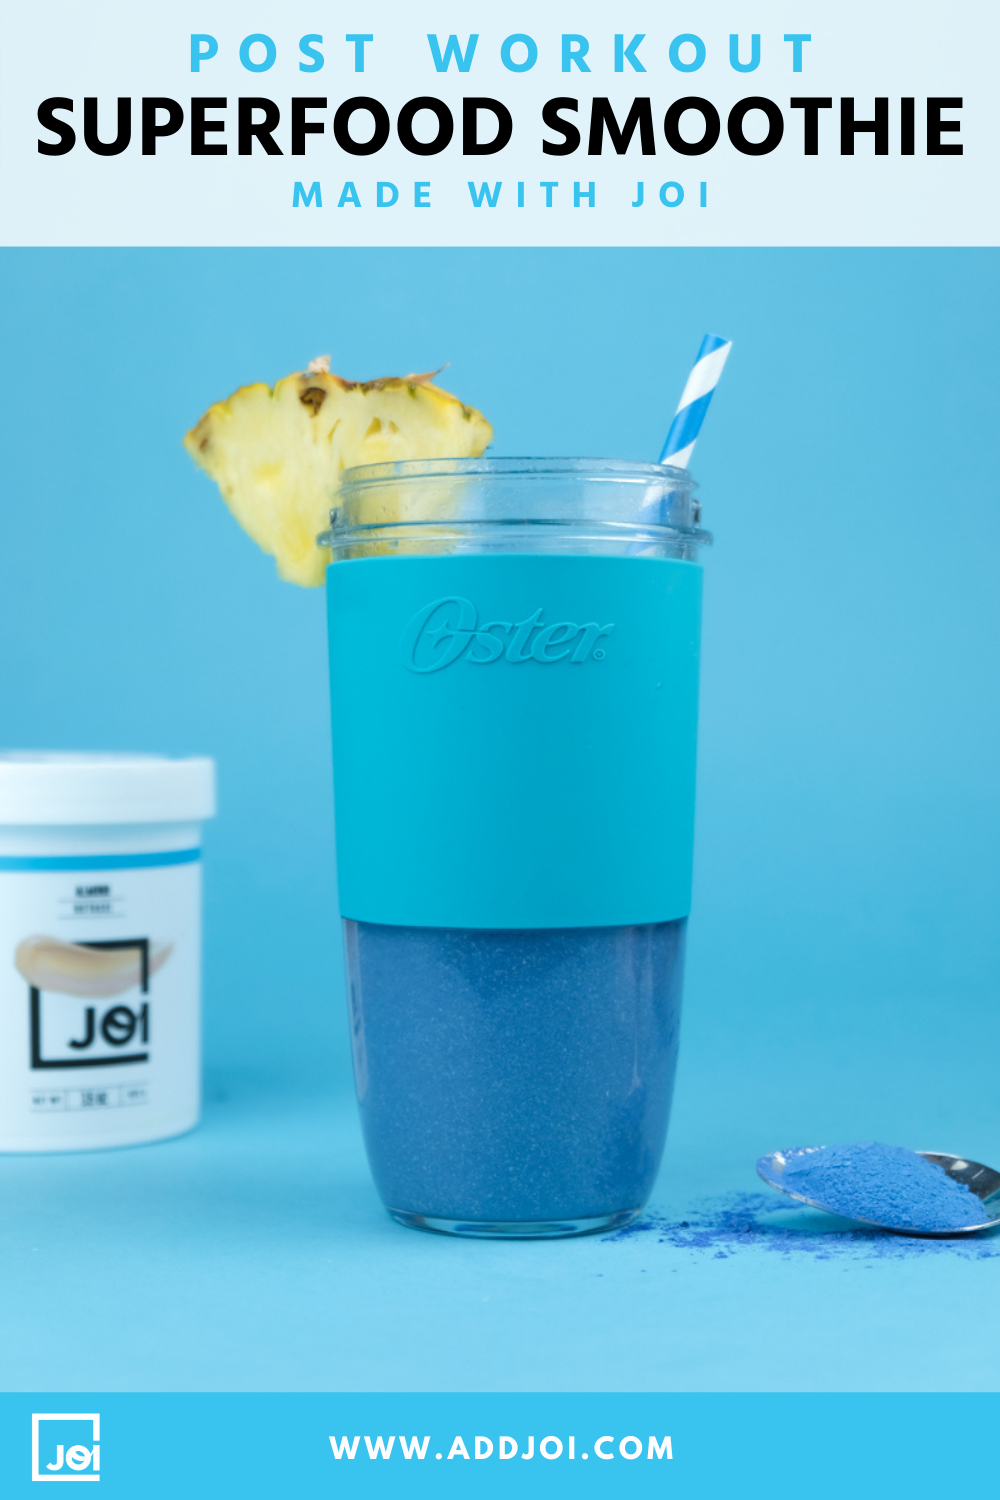 This Superfood Smoothie Made with JOI and Blended with Oster Takes the Hard Work Out of Healthy Eating